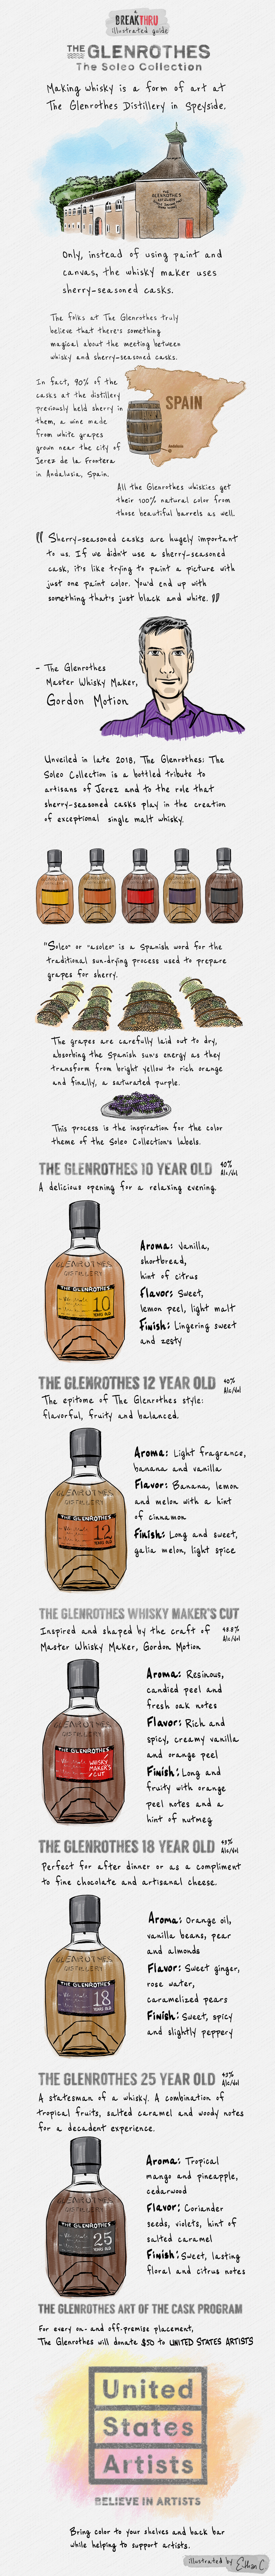 Glenrothes Soleo Illustrated Guide